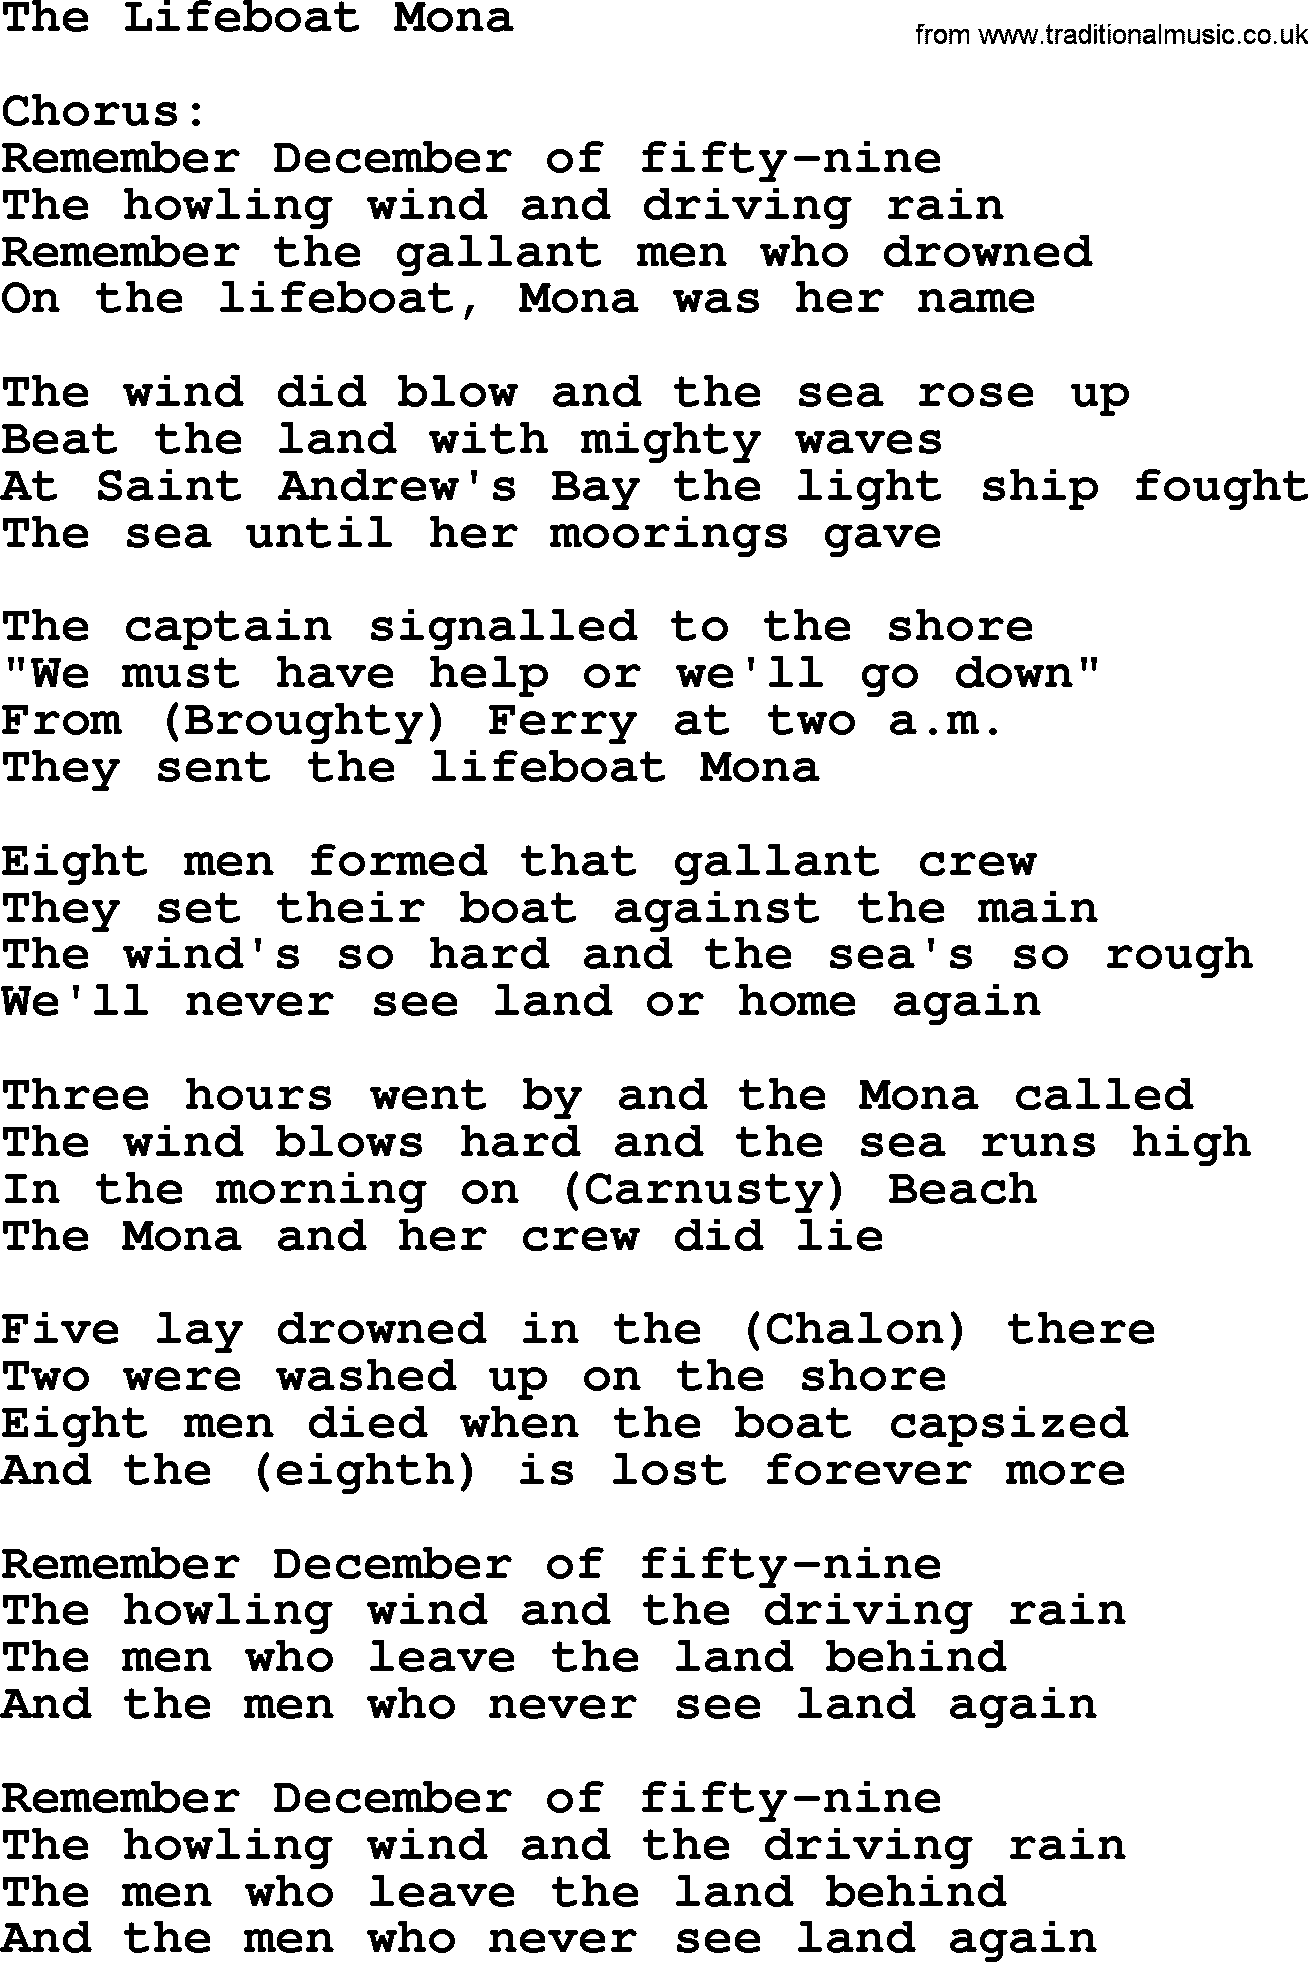 The Dubliners song: The Lifeboat Mona, lyrics